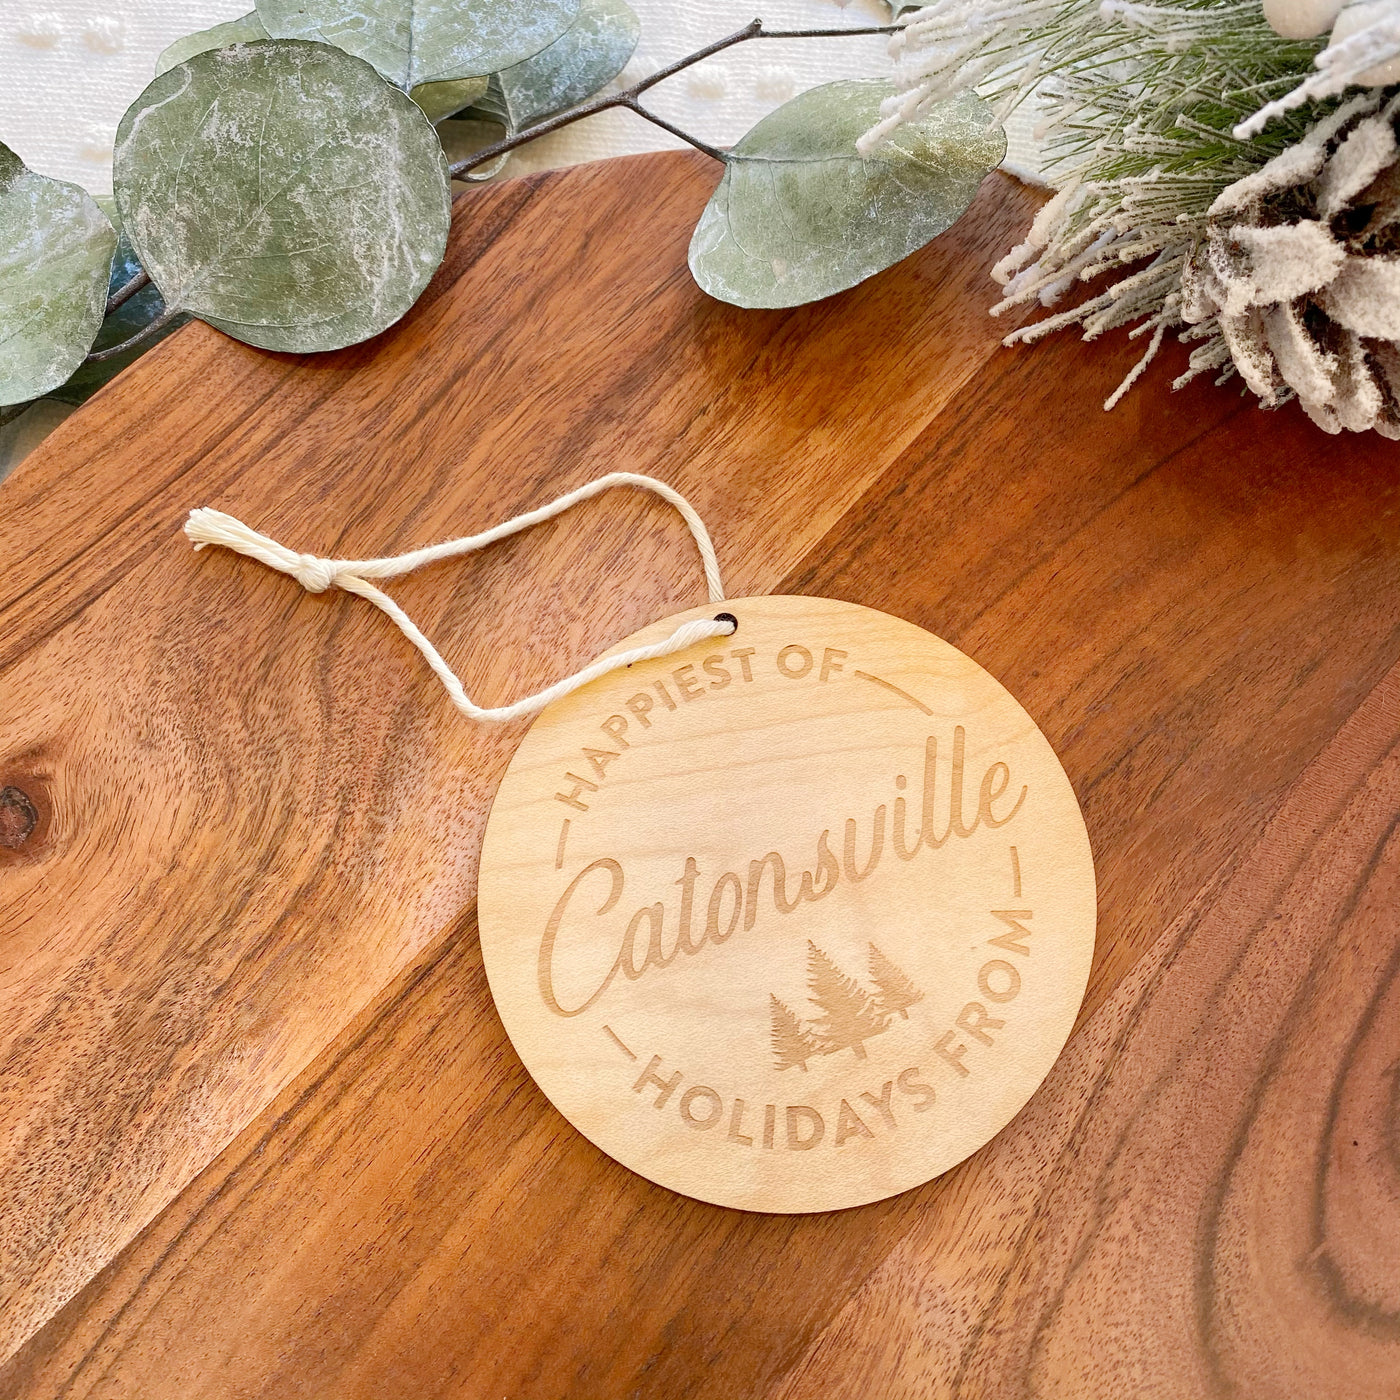 Ornament | Happiest of Holidays from Catonsville - Poppy and Stella